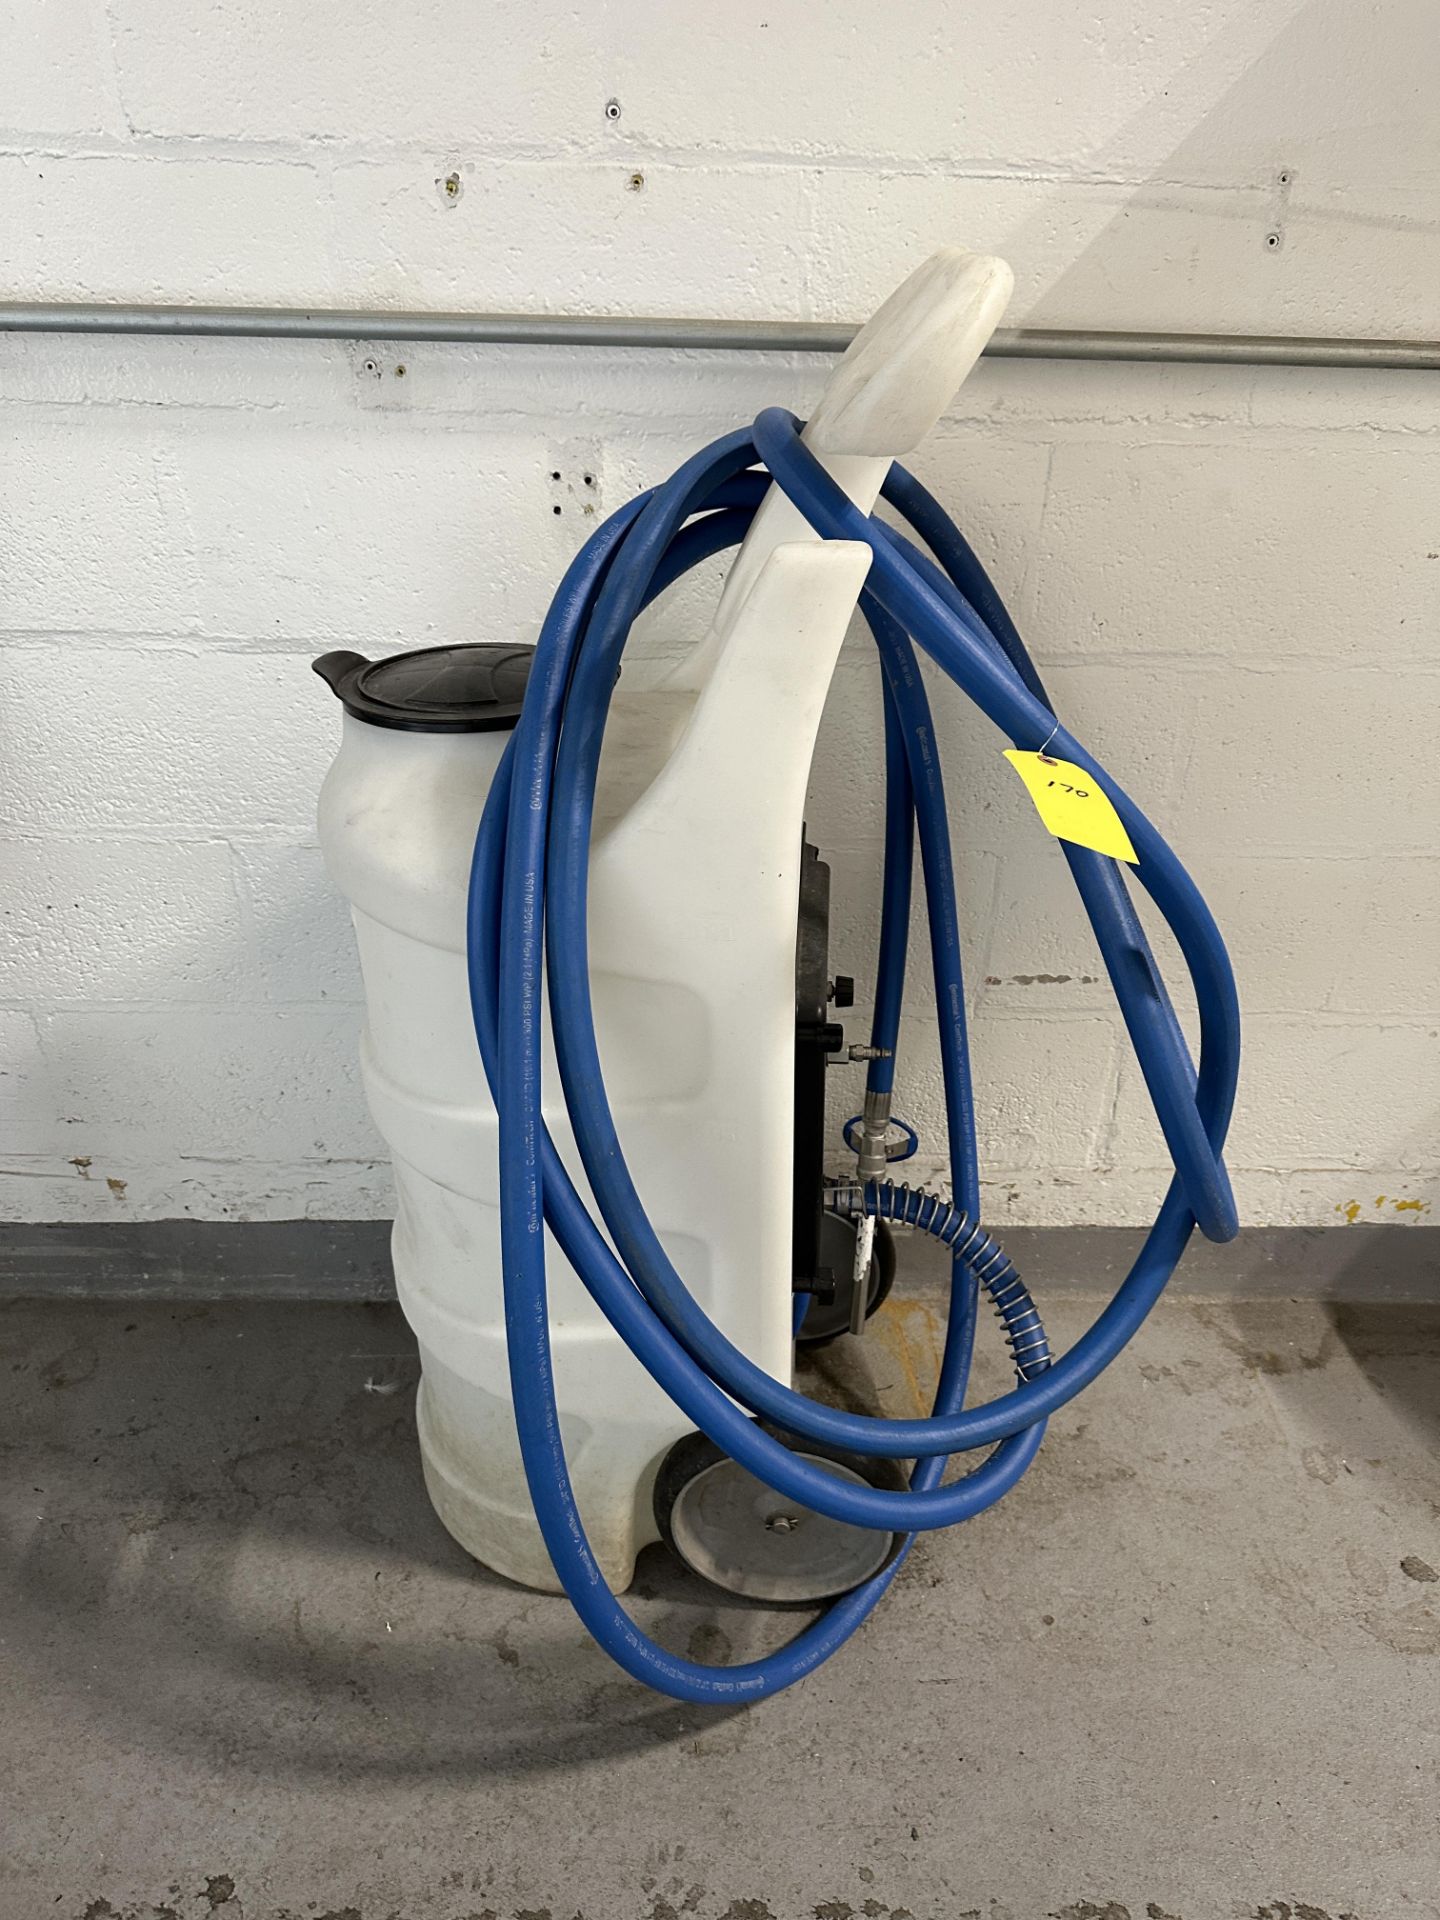 Alpha Chemical 20 Gallon Foaming Cleaner Unit | Rig Fee $20 - Image 2 of 3